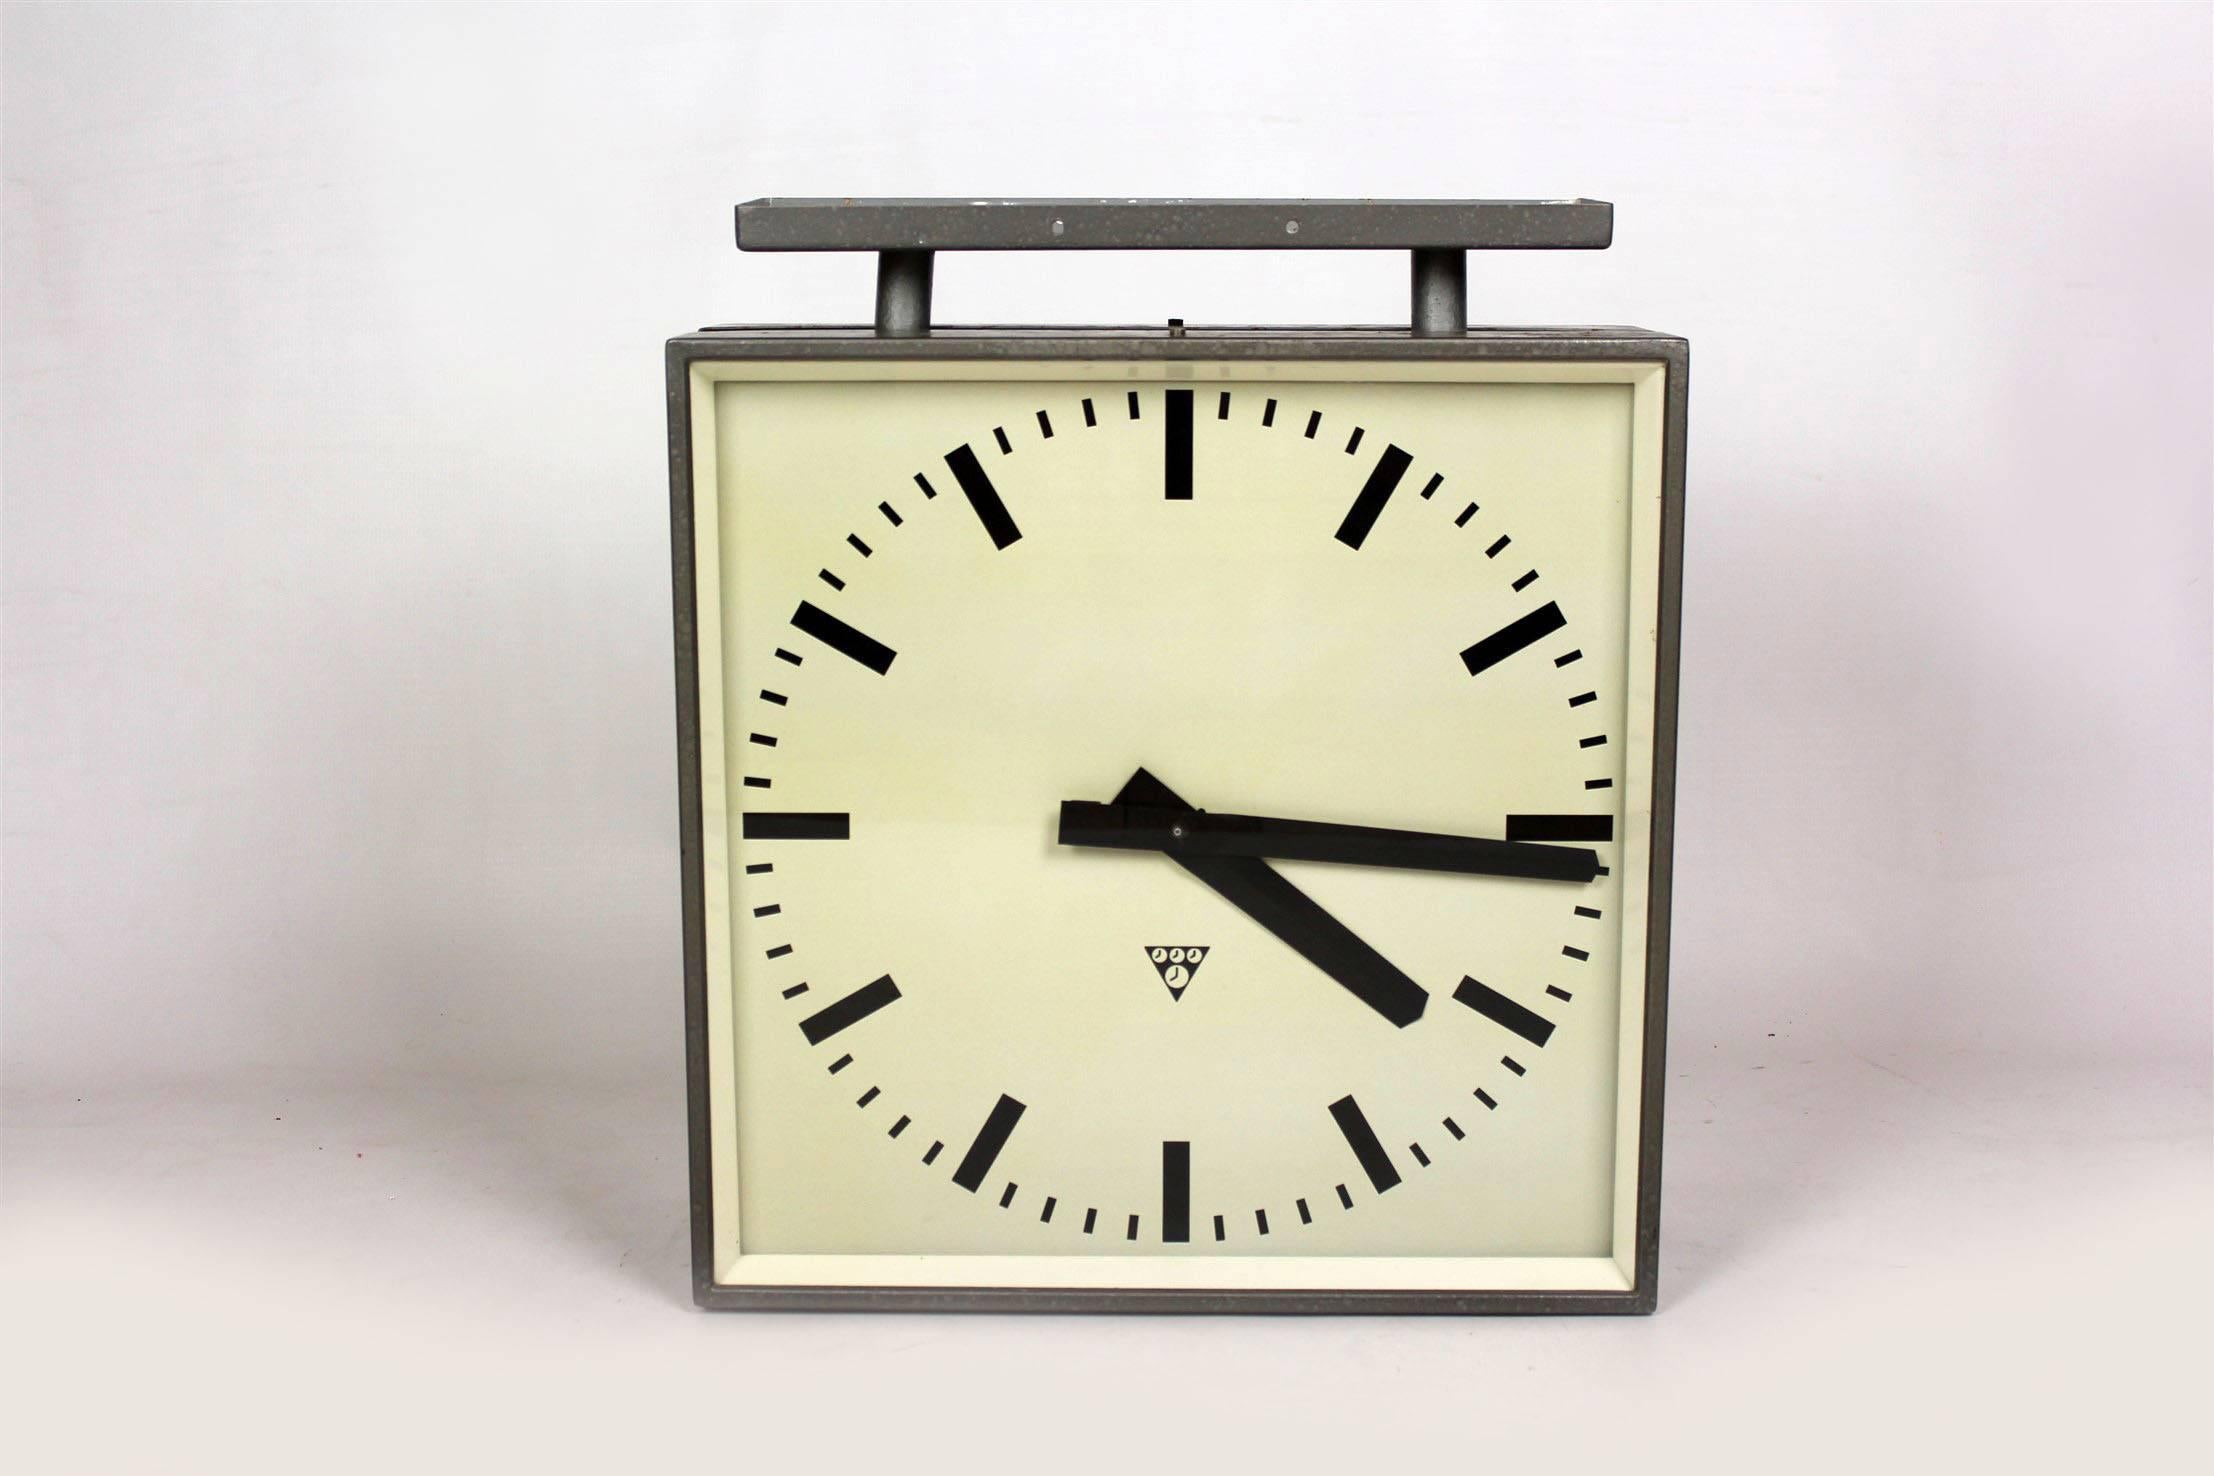 Industrial Large Double-Sided Railway Clock from Pragotron, 1970s